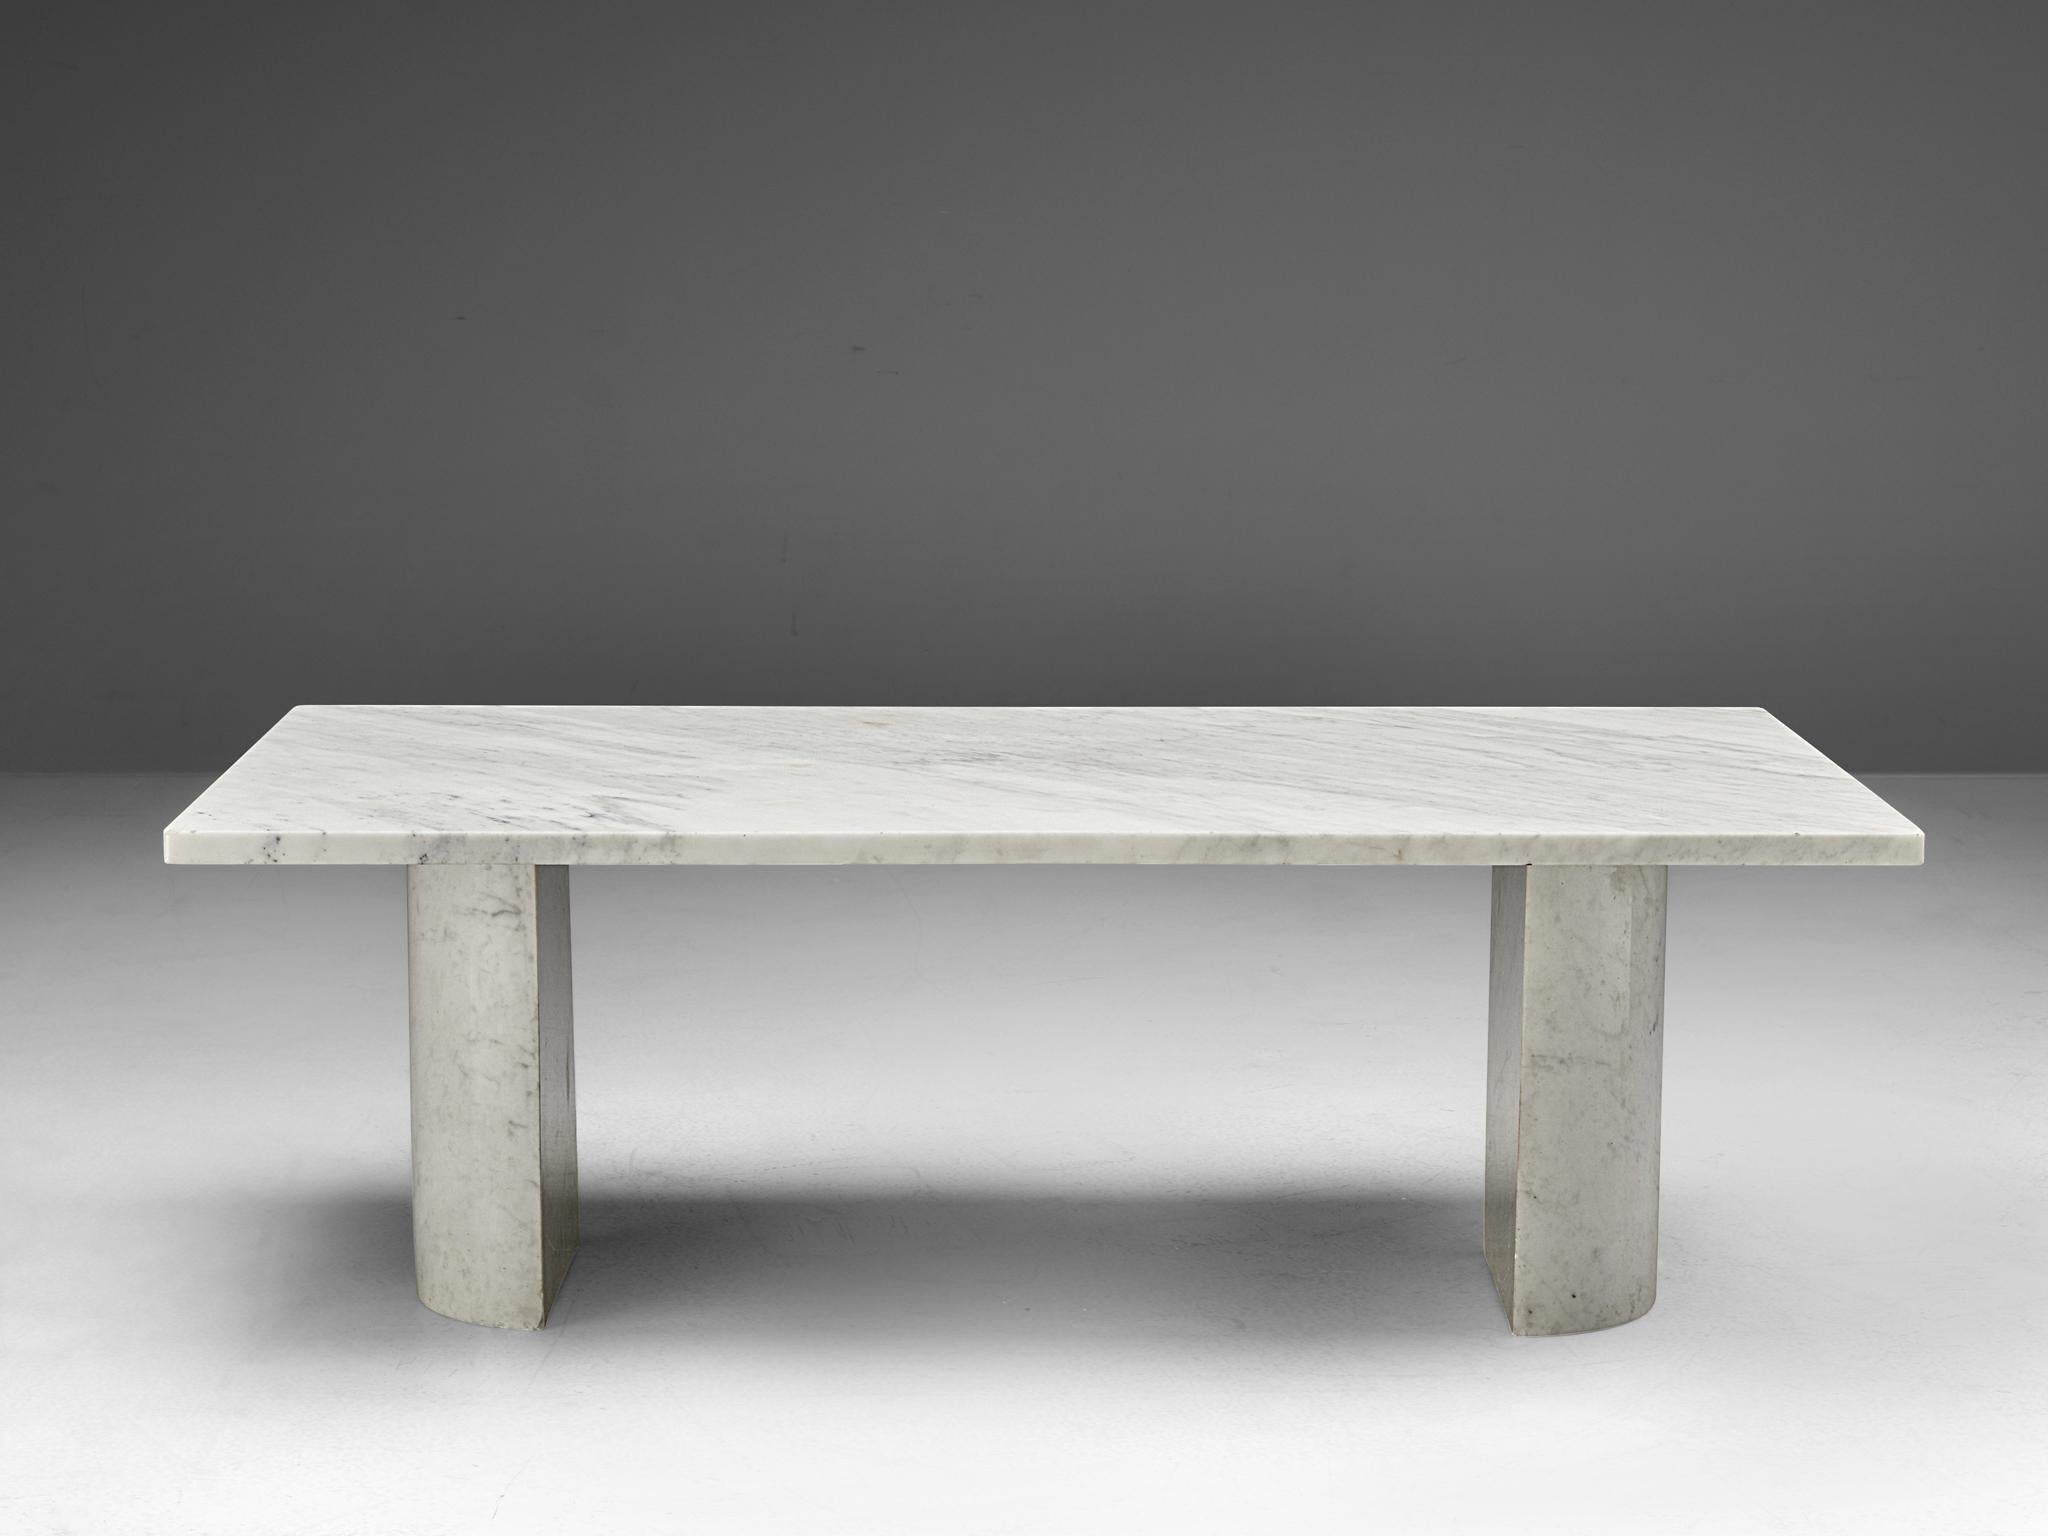 Coffee table, Carrara marble, Italy, 1970s

This large cocktail table features a rectangular shaped table top of 1.50m/59in. The top is supported by two semi-circular columns. The aesthetics are typical for postmodern design, bearing references to